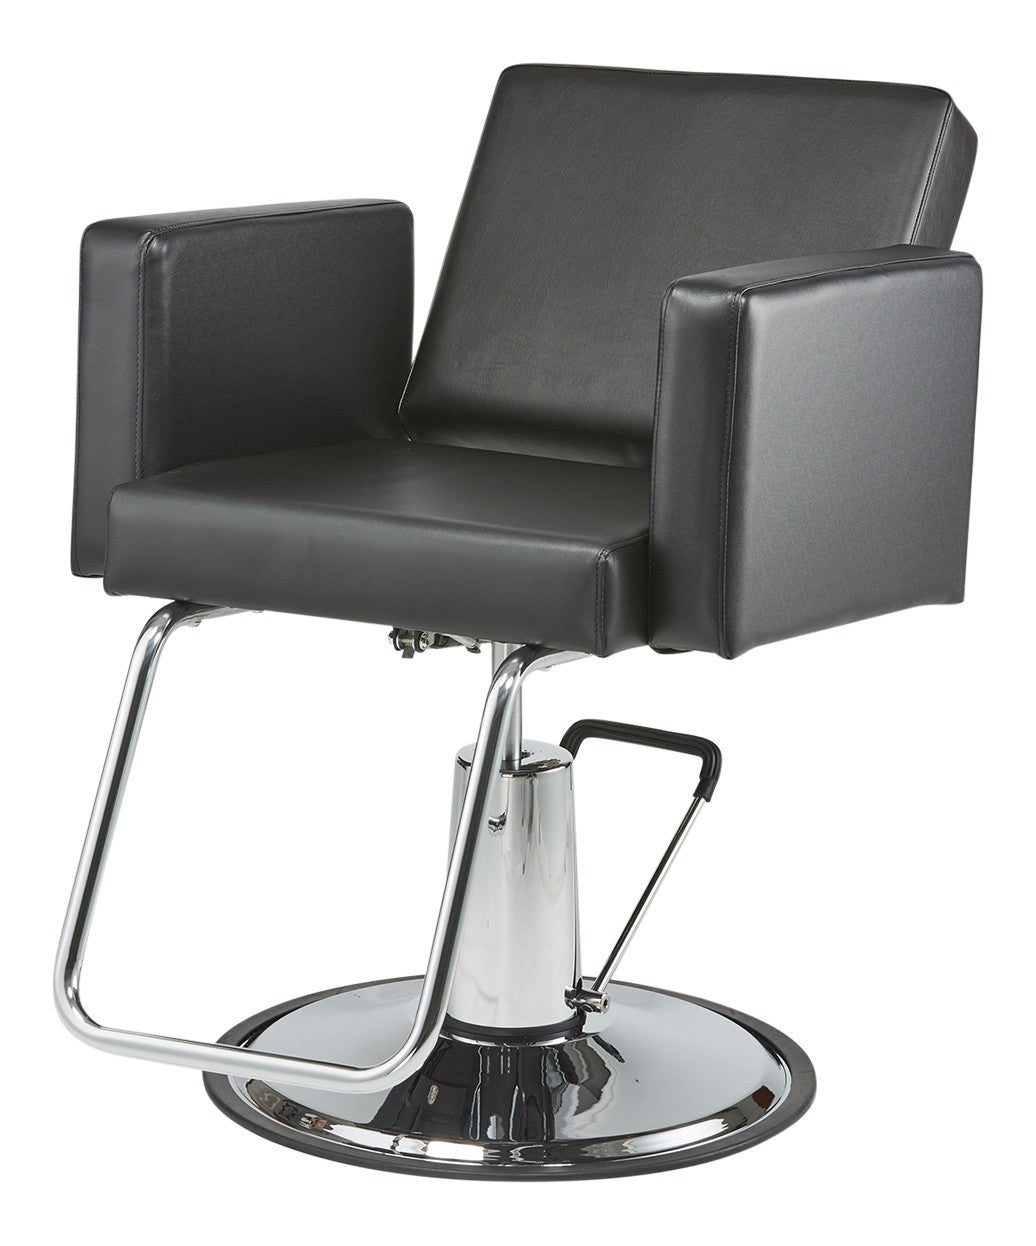 Pibbs 3446 Cosmo All-Purpose Chair